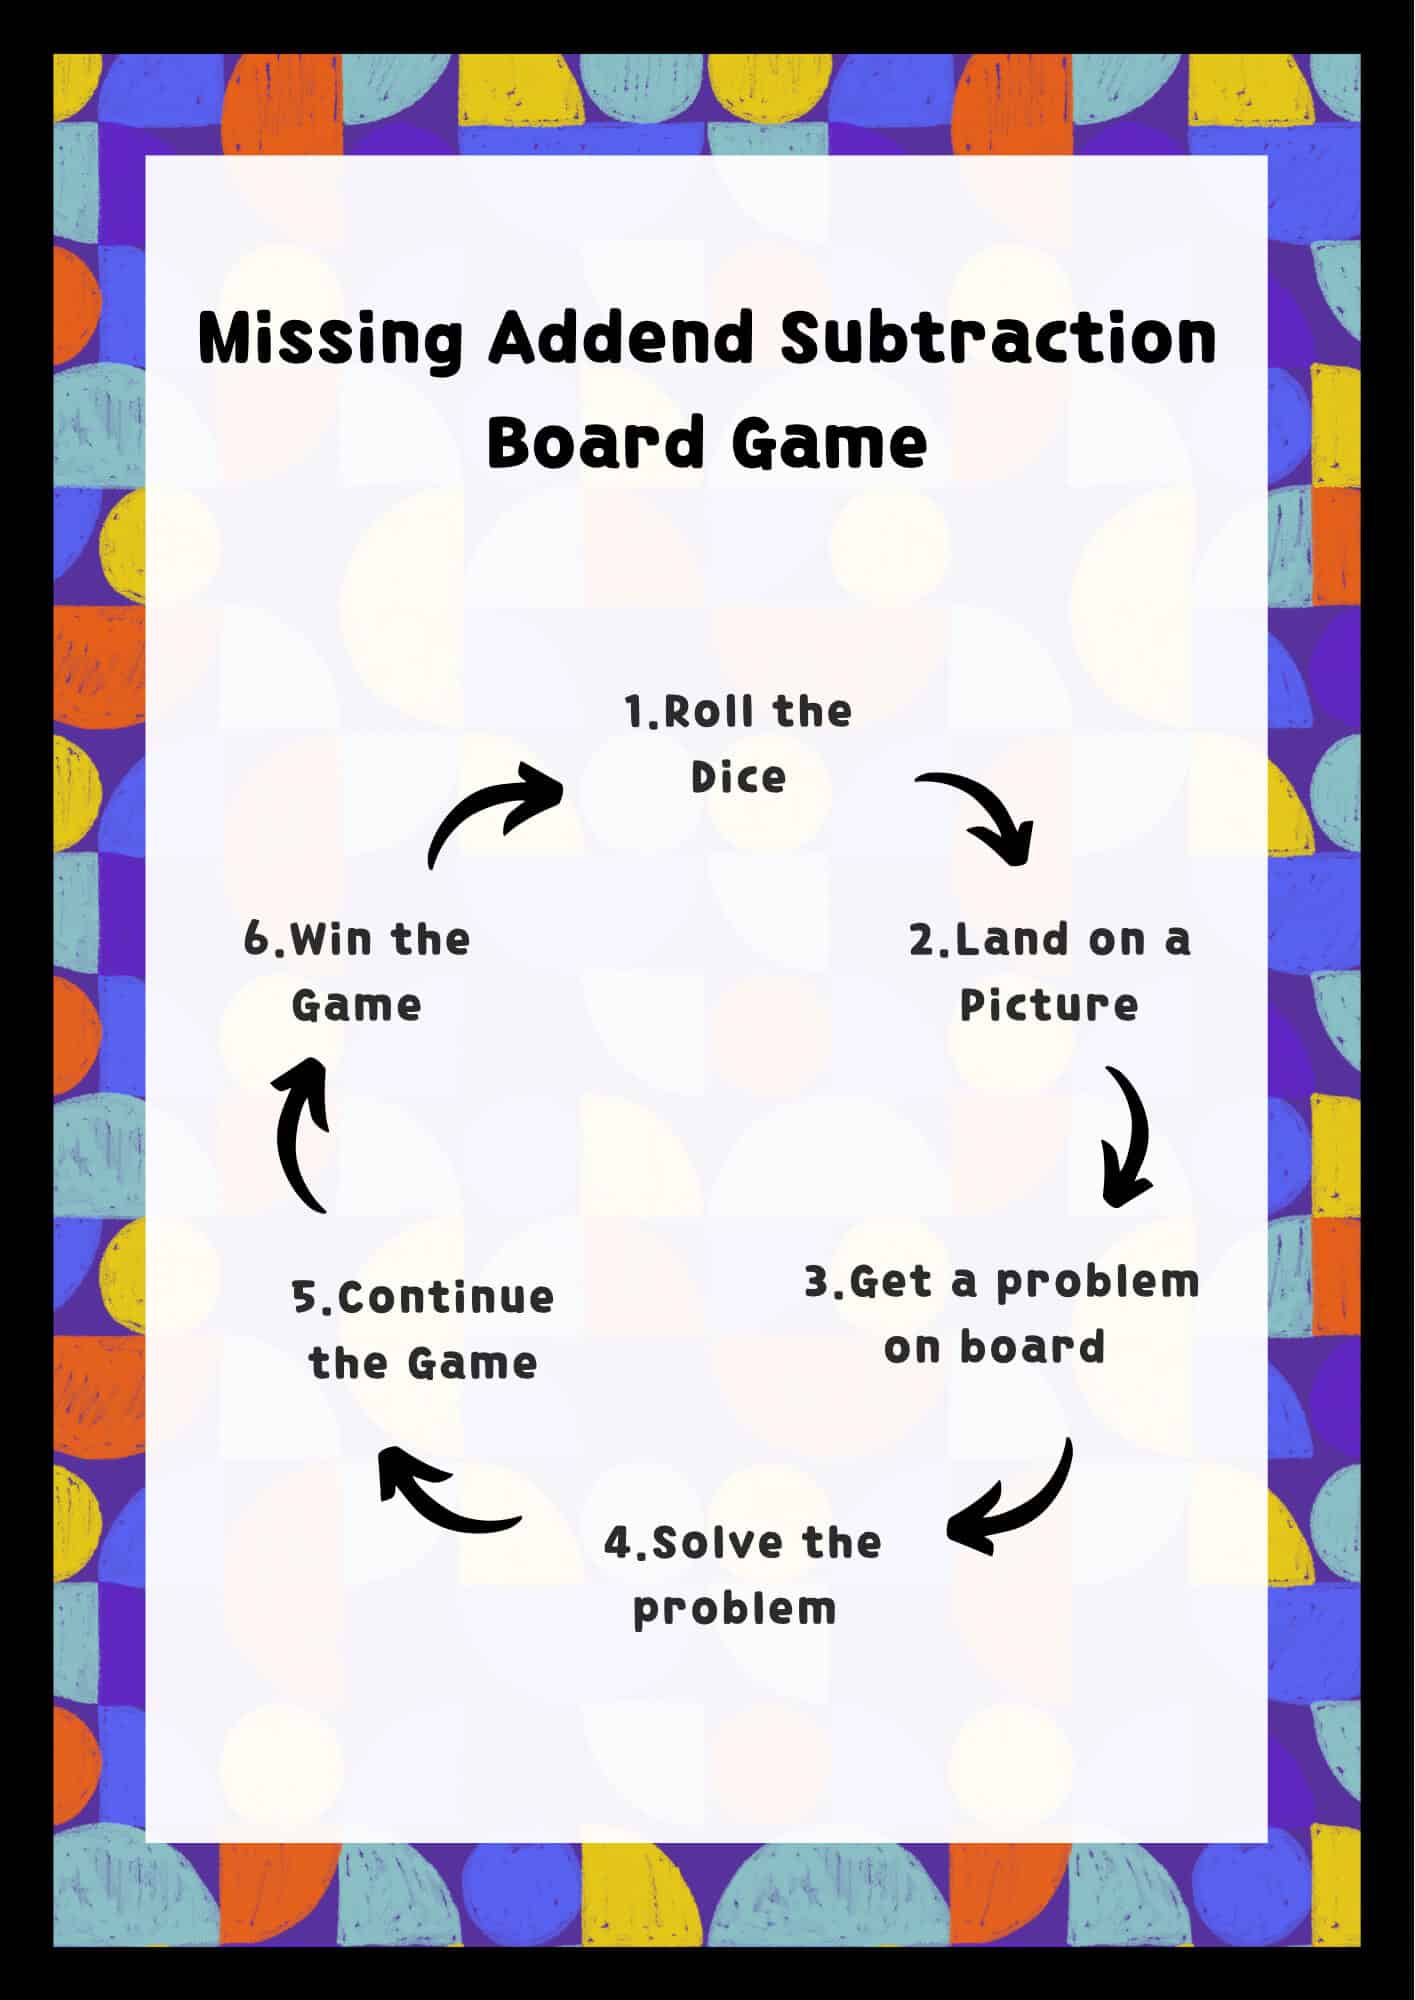 step by step method of missing addend subtraction board game